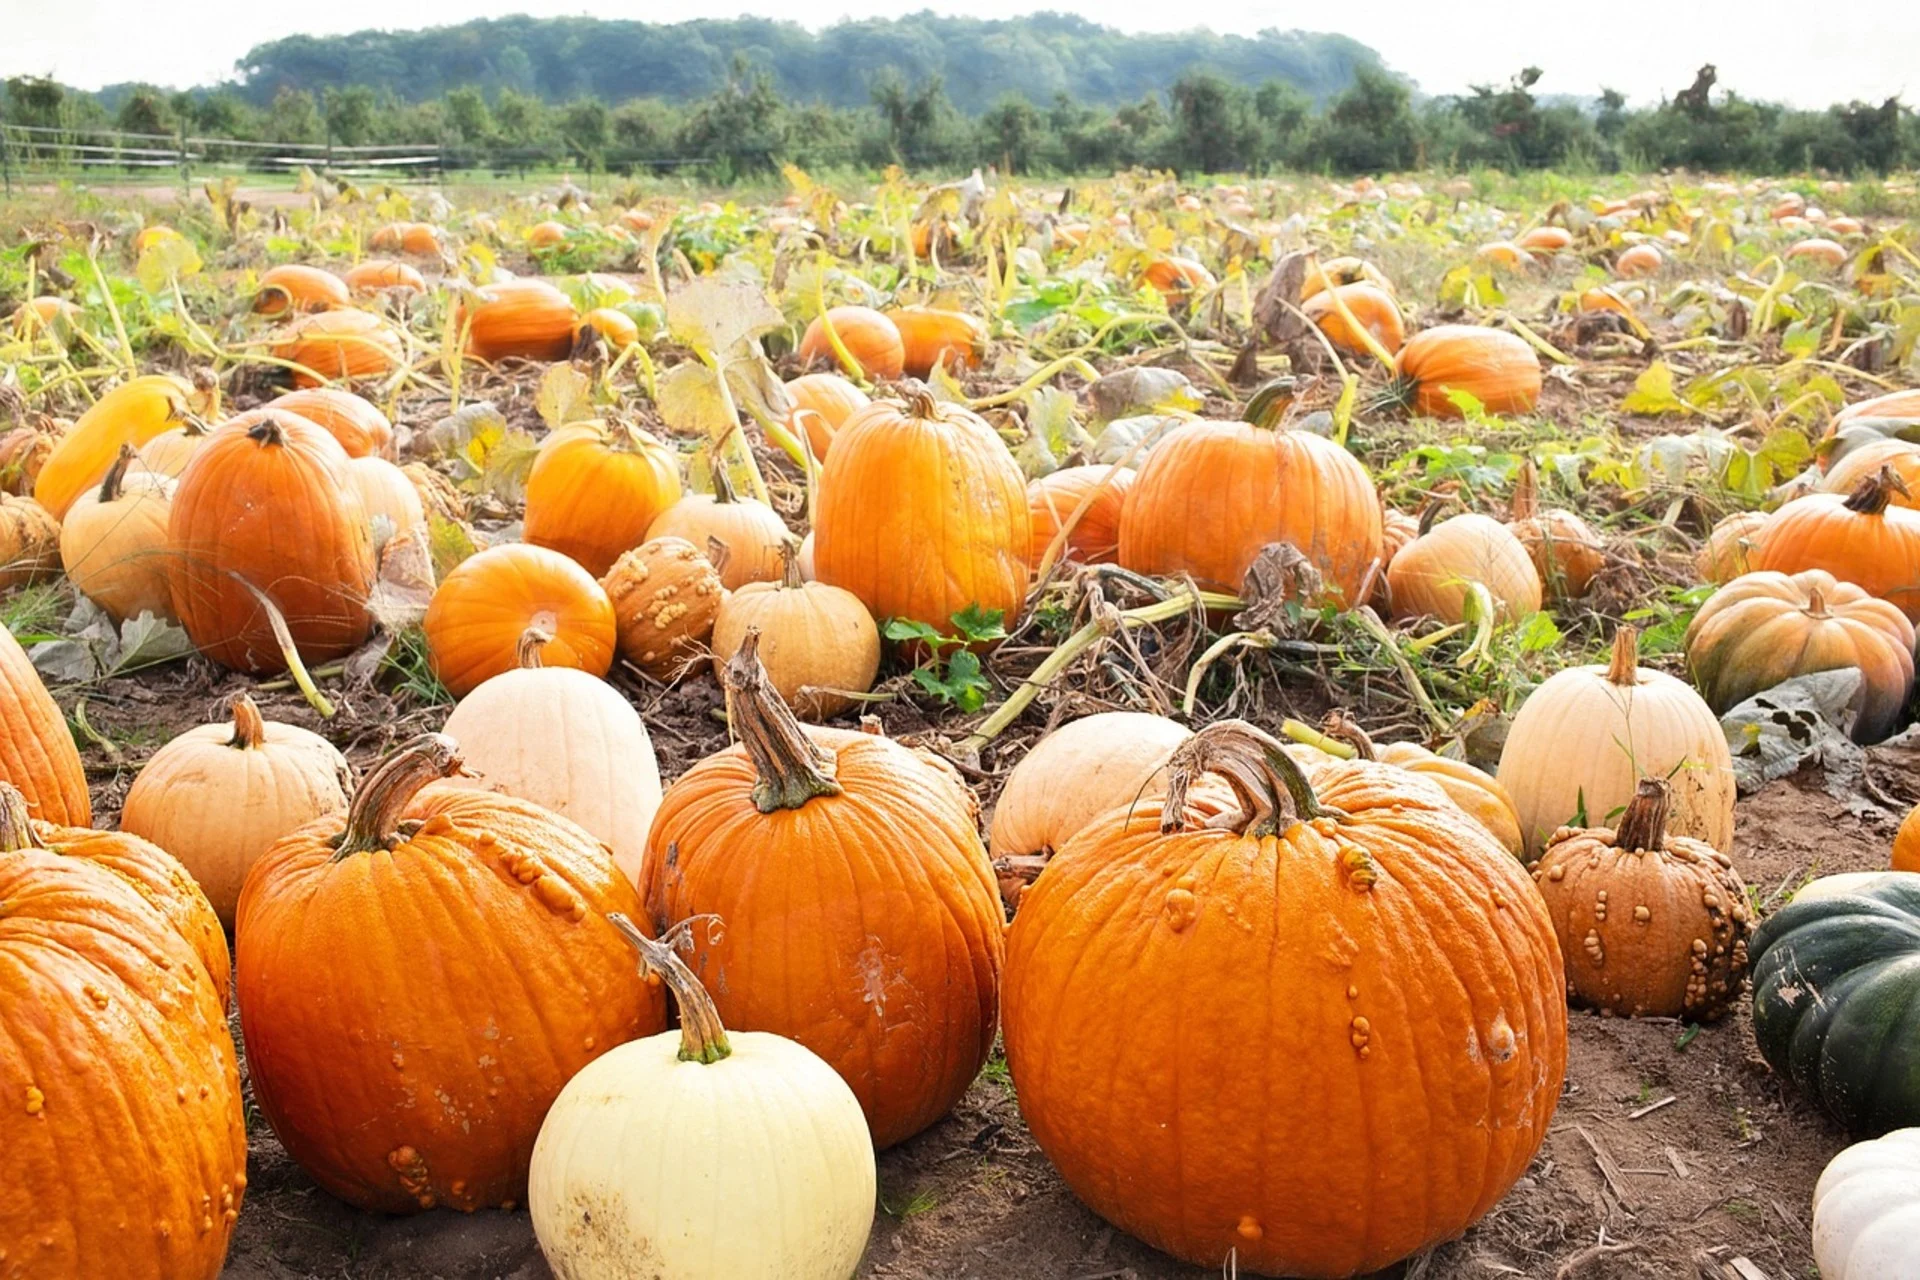 How to pick the perfect pumpkin in the patch